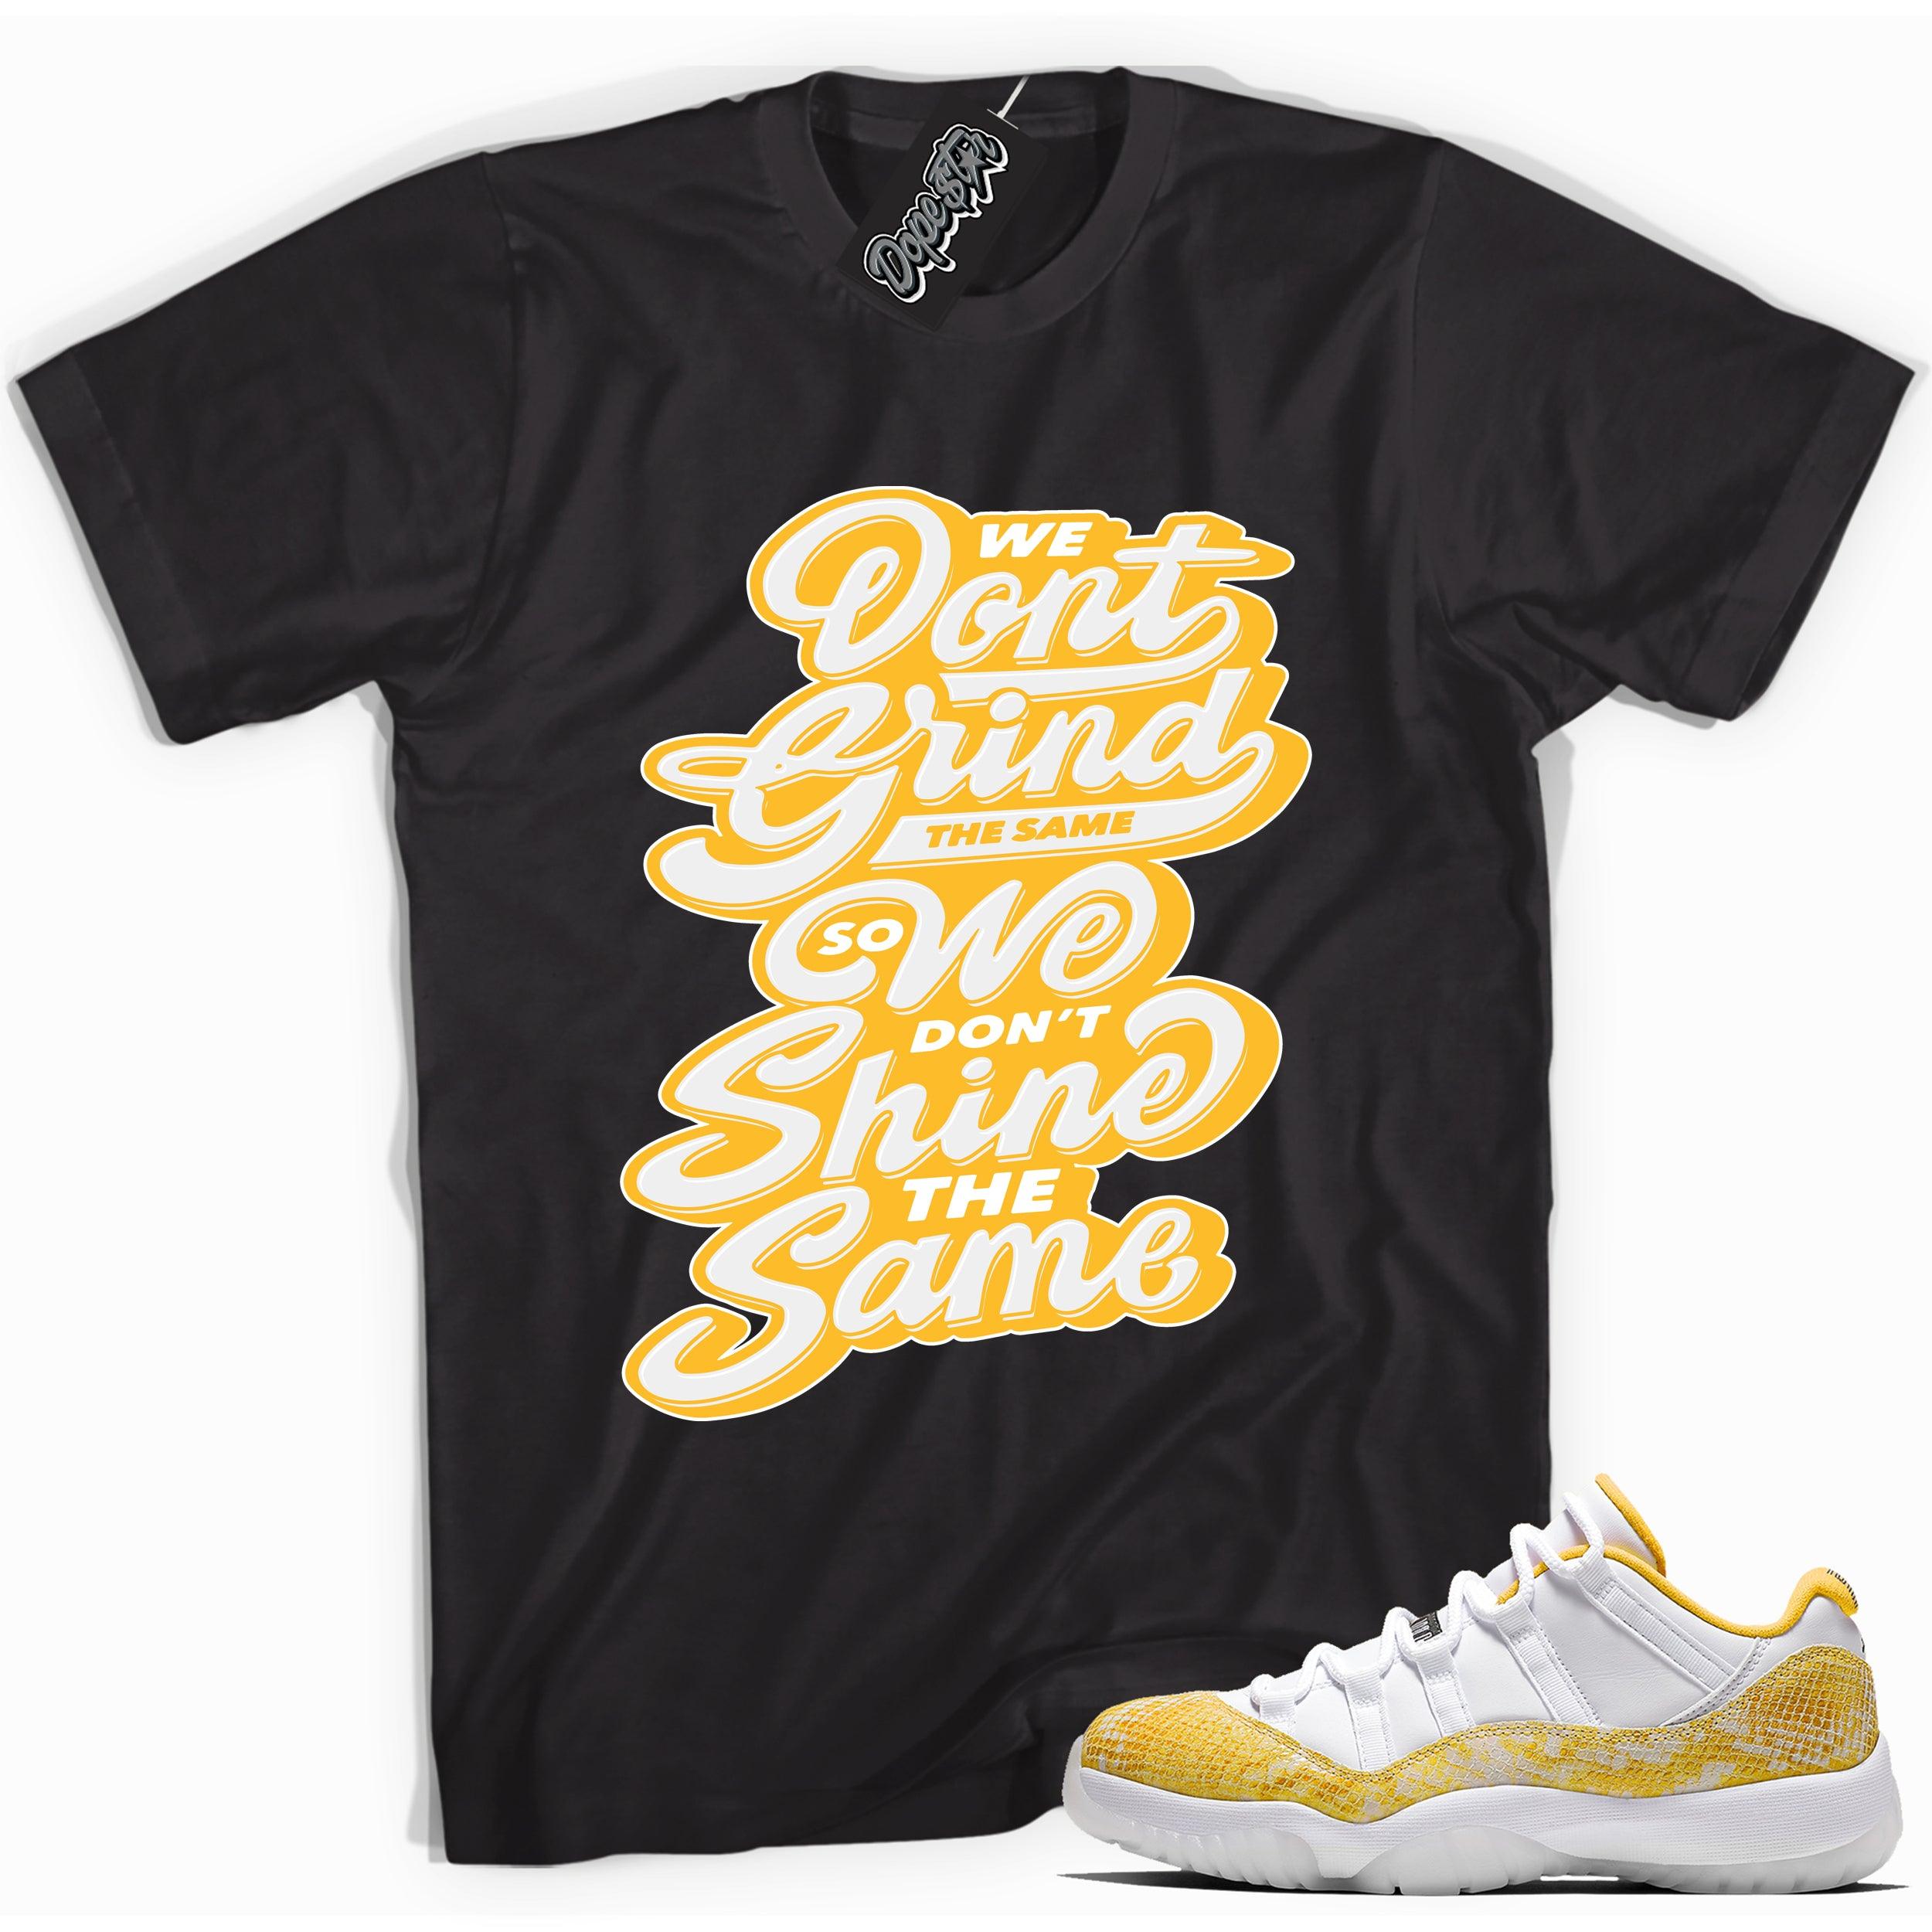 Cool black graphic tee with 'don't grind don't shine the same' print, that perfectly matches  Air Jordan 11 Low Yellow Snakeskin sneakers